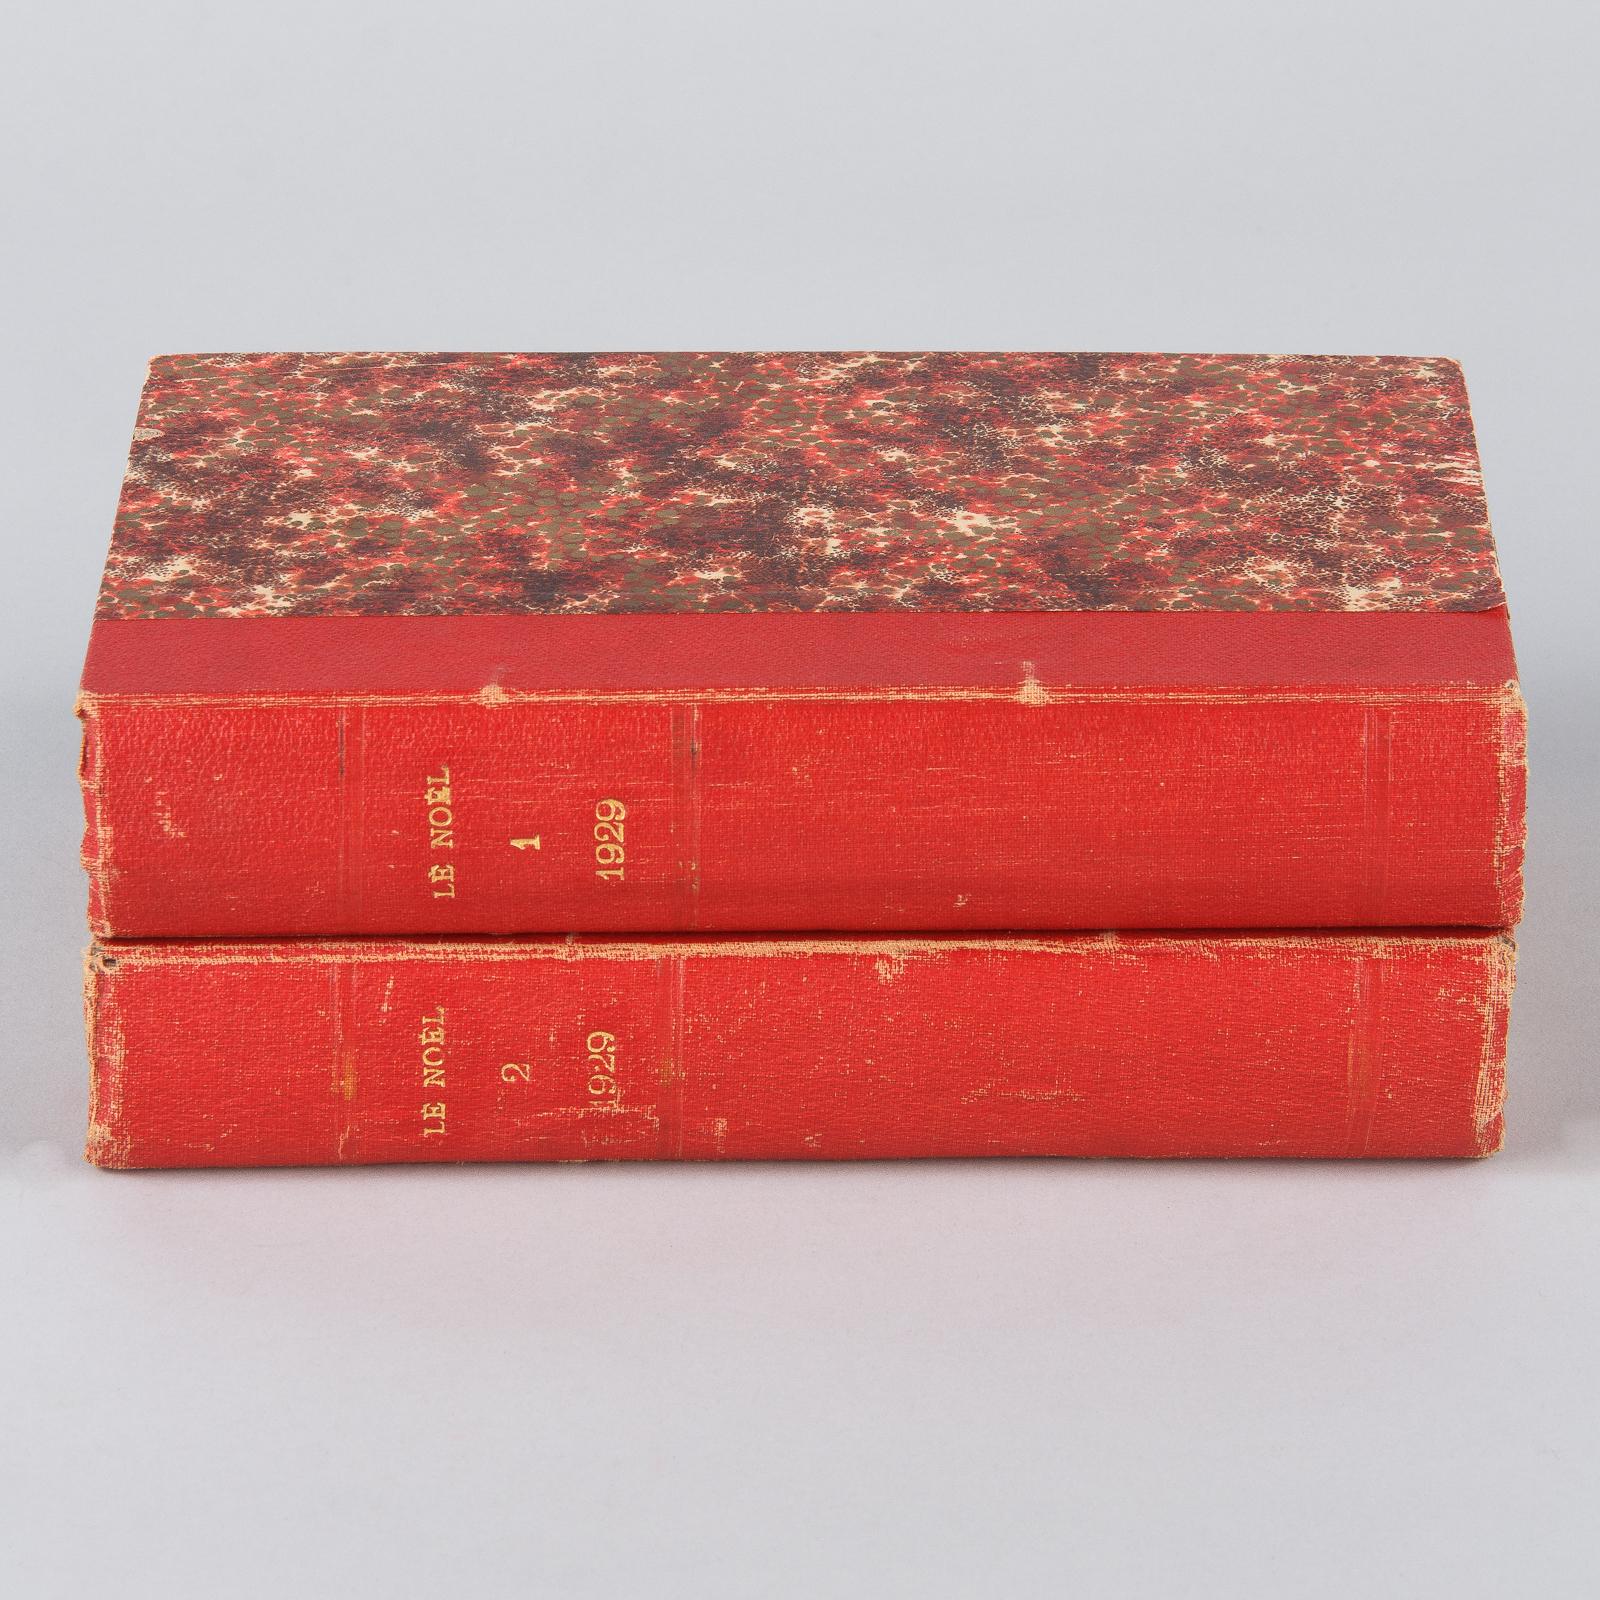 French Books, Le Noel, Two Volume Set, 1929 For Sale 4